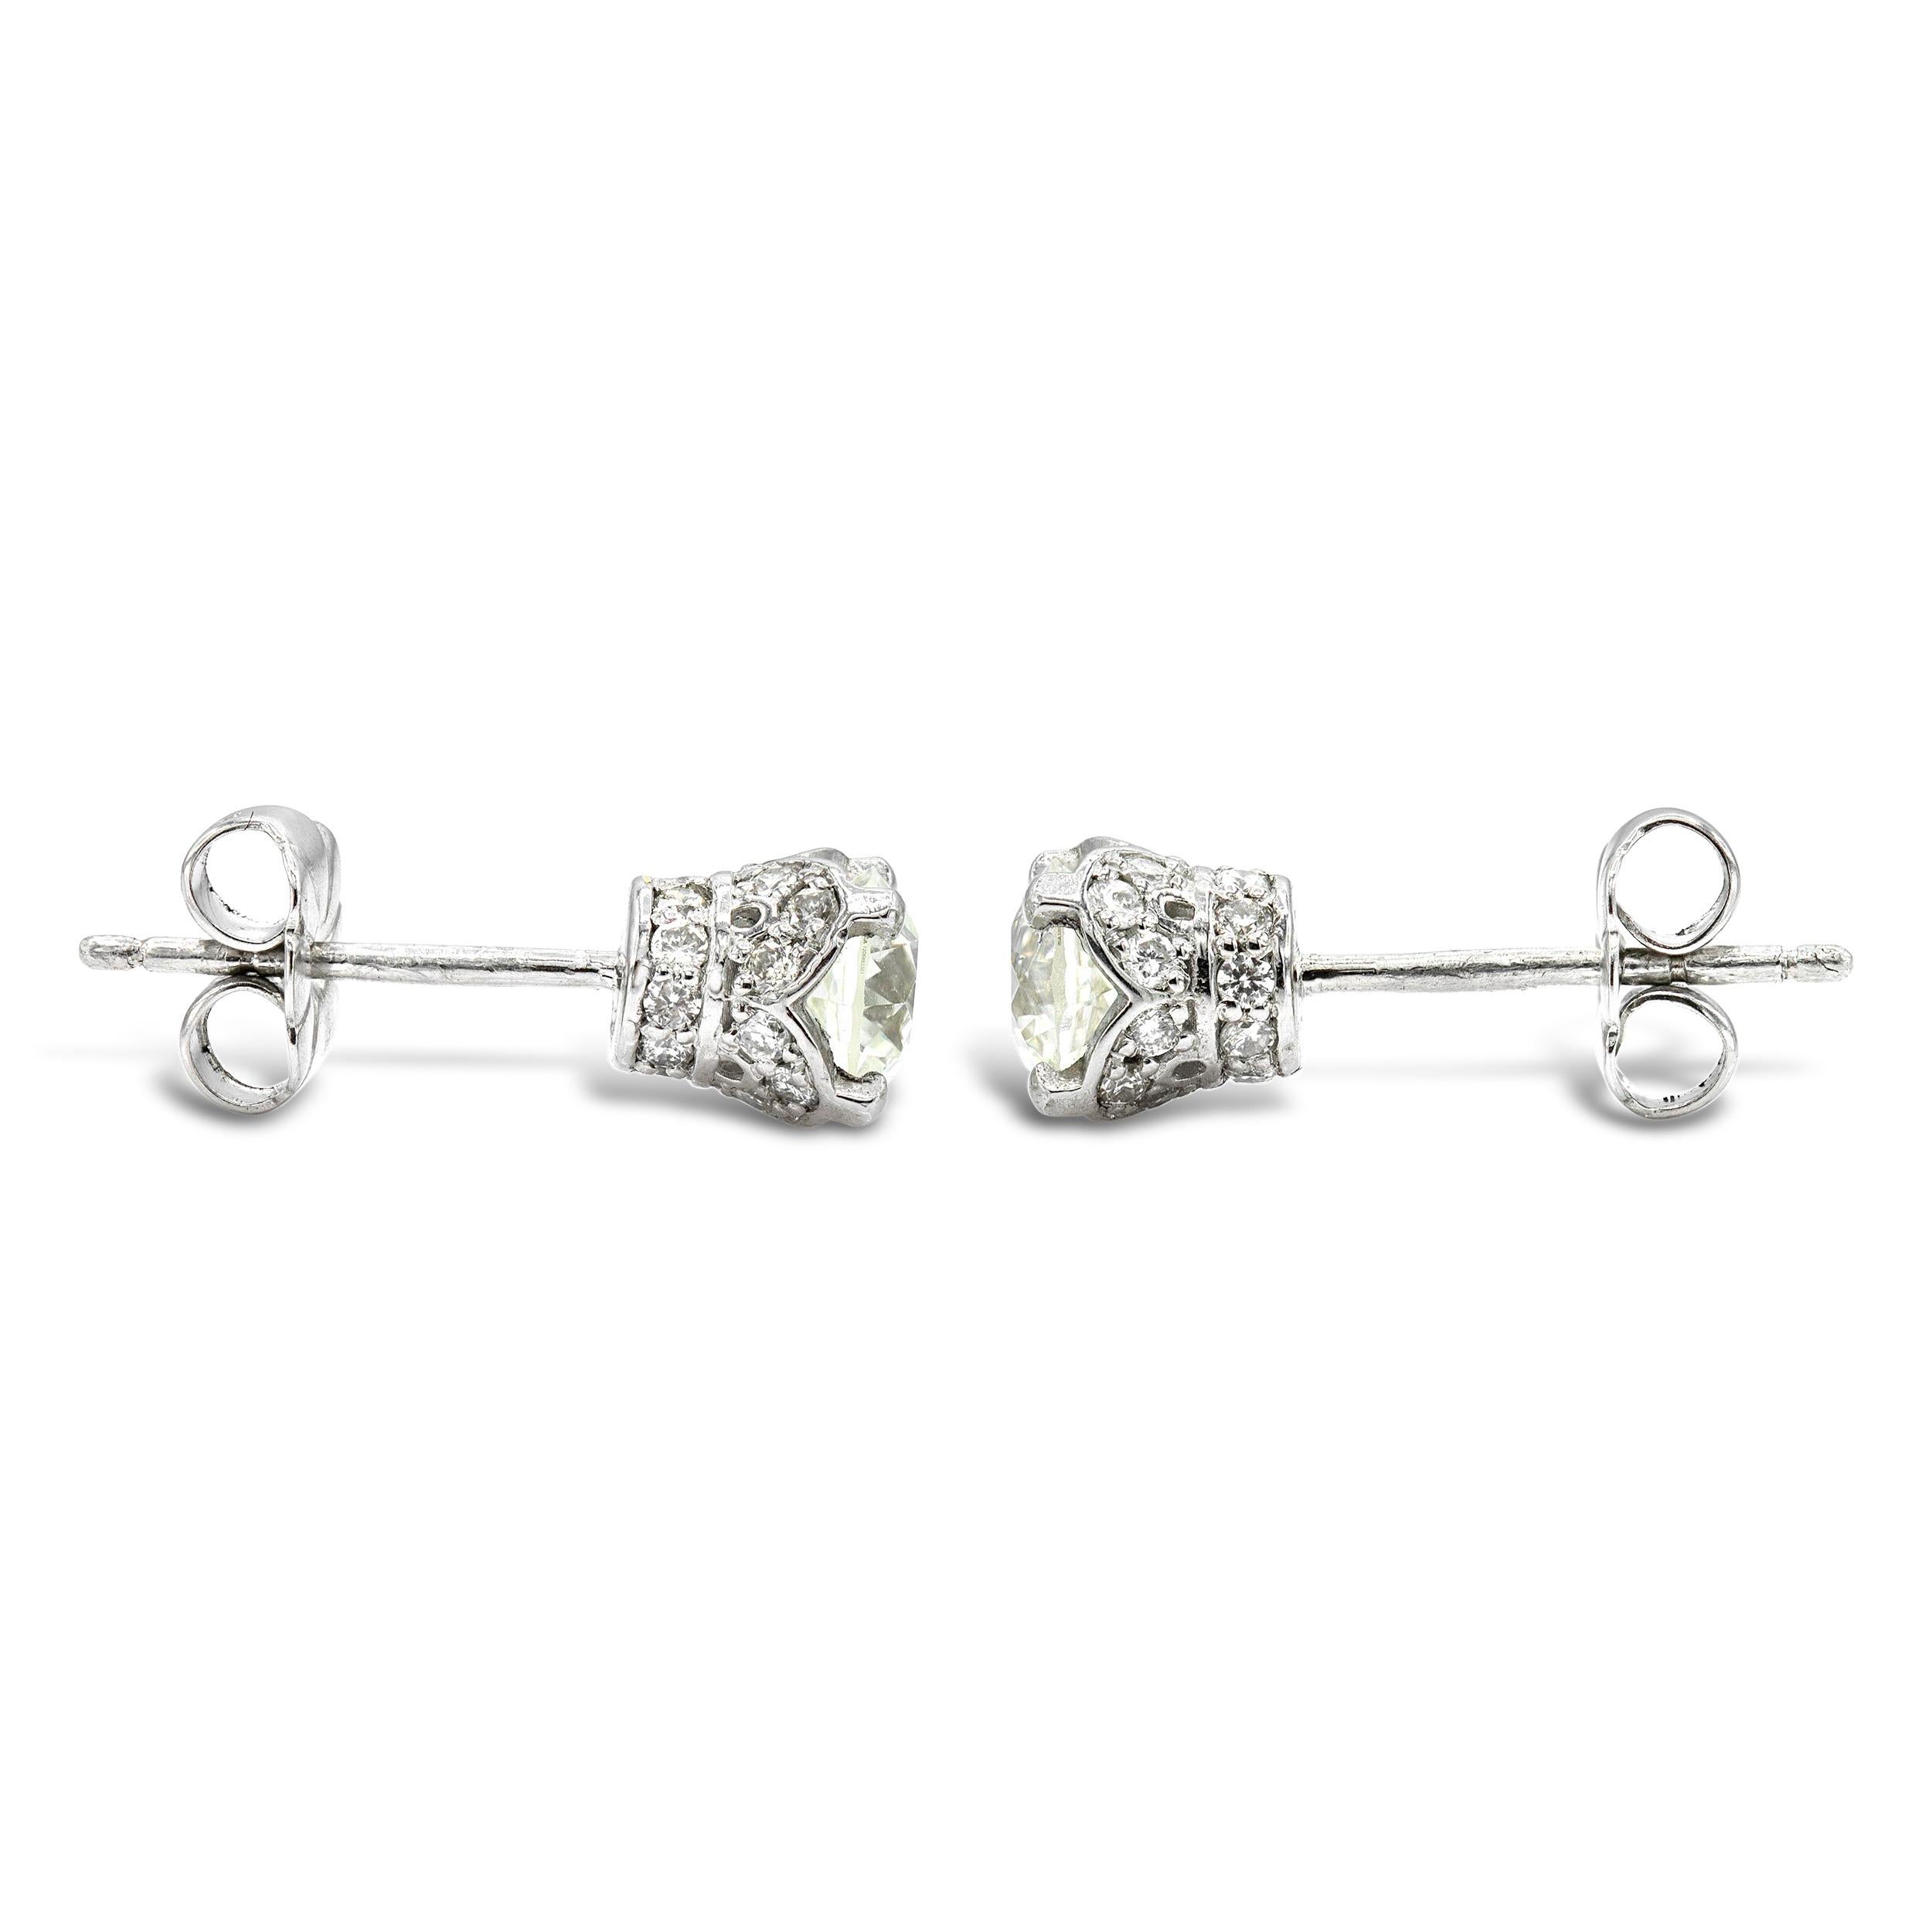 Antique 1.15 ctw Old European Cut Diamond Studs GIA Certified In Good Condition For Sale In New York, NY